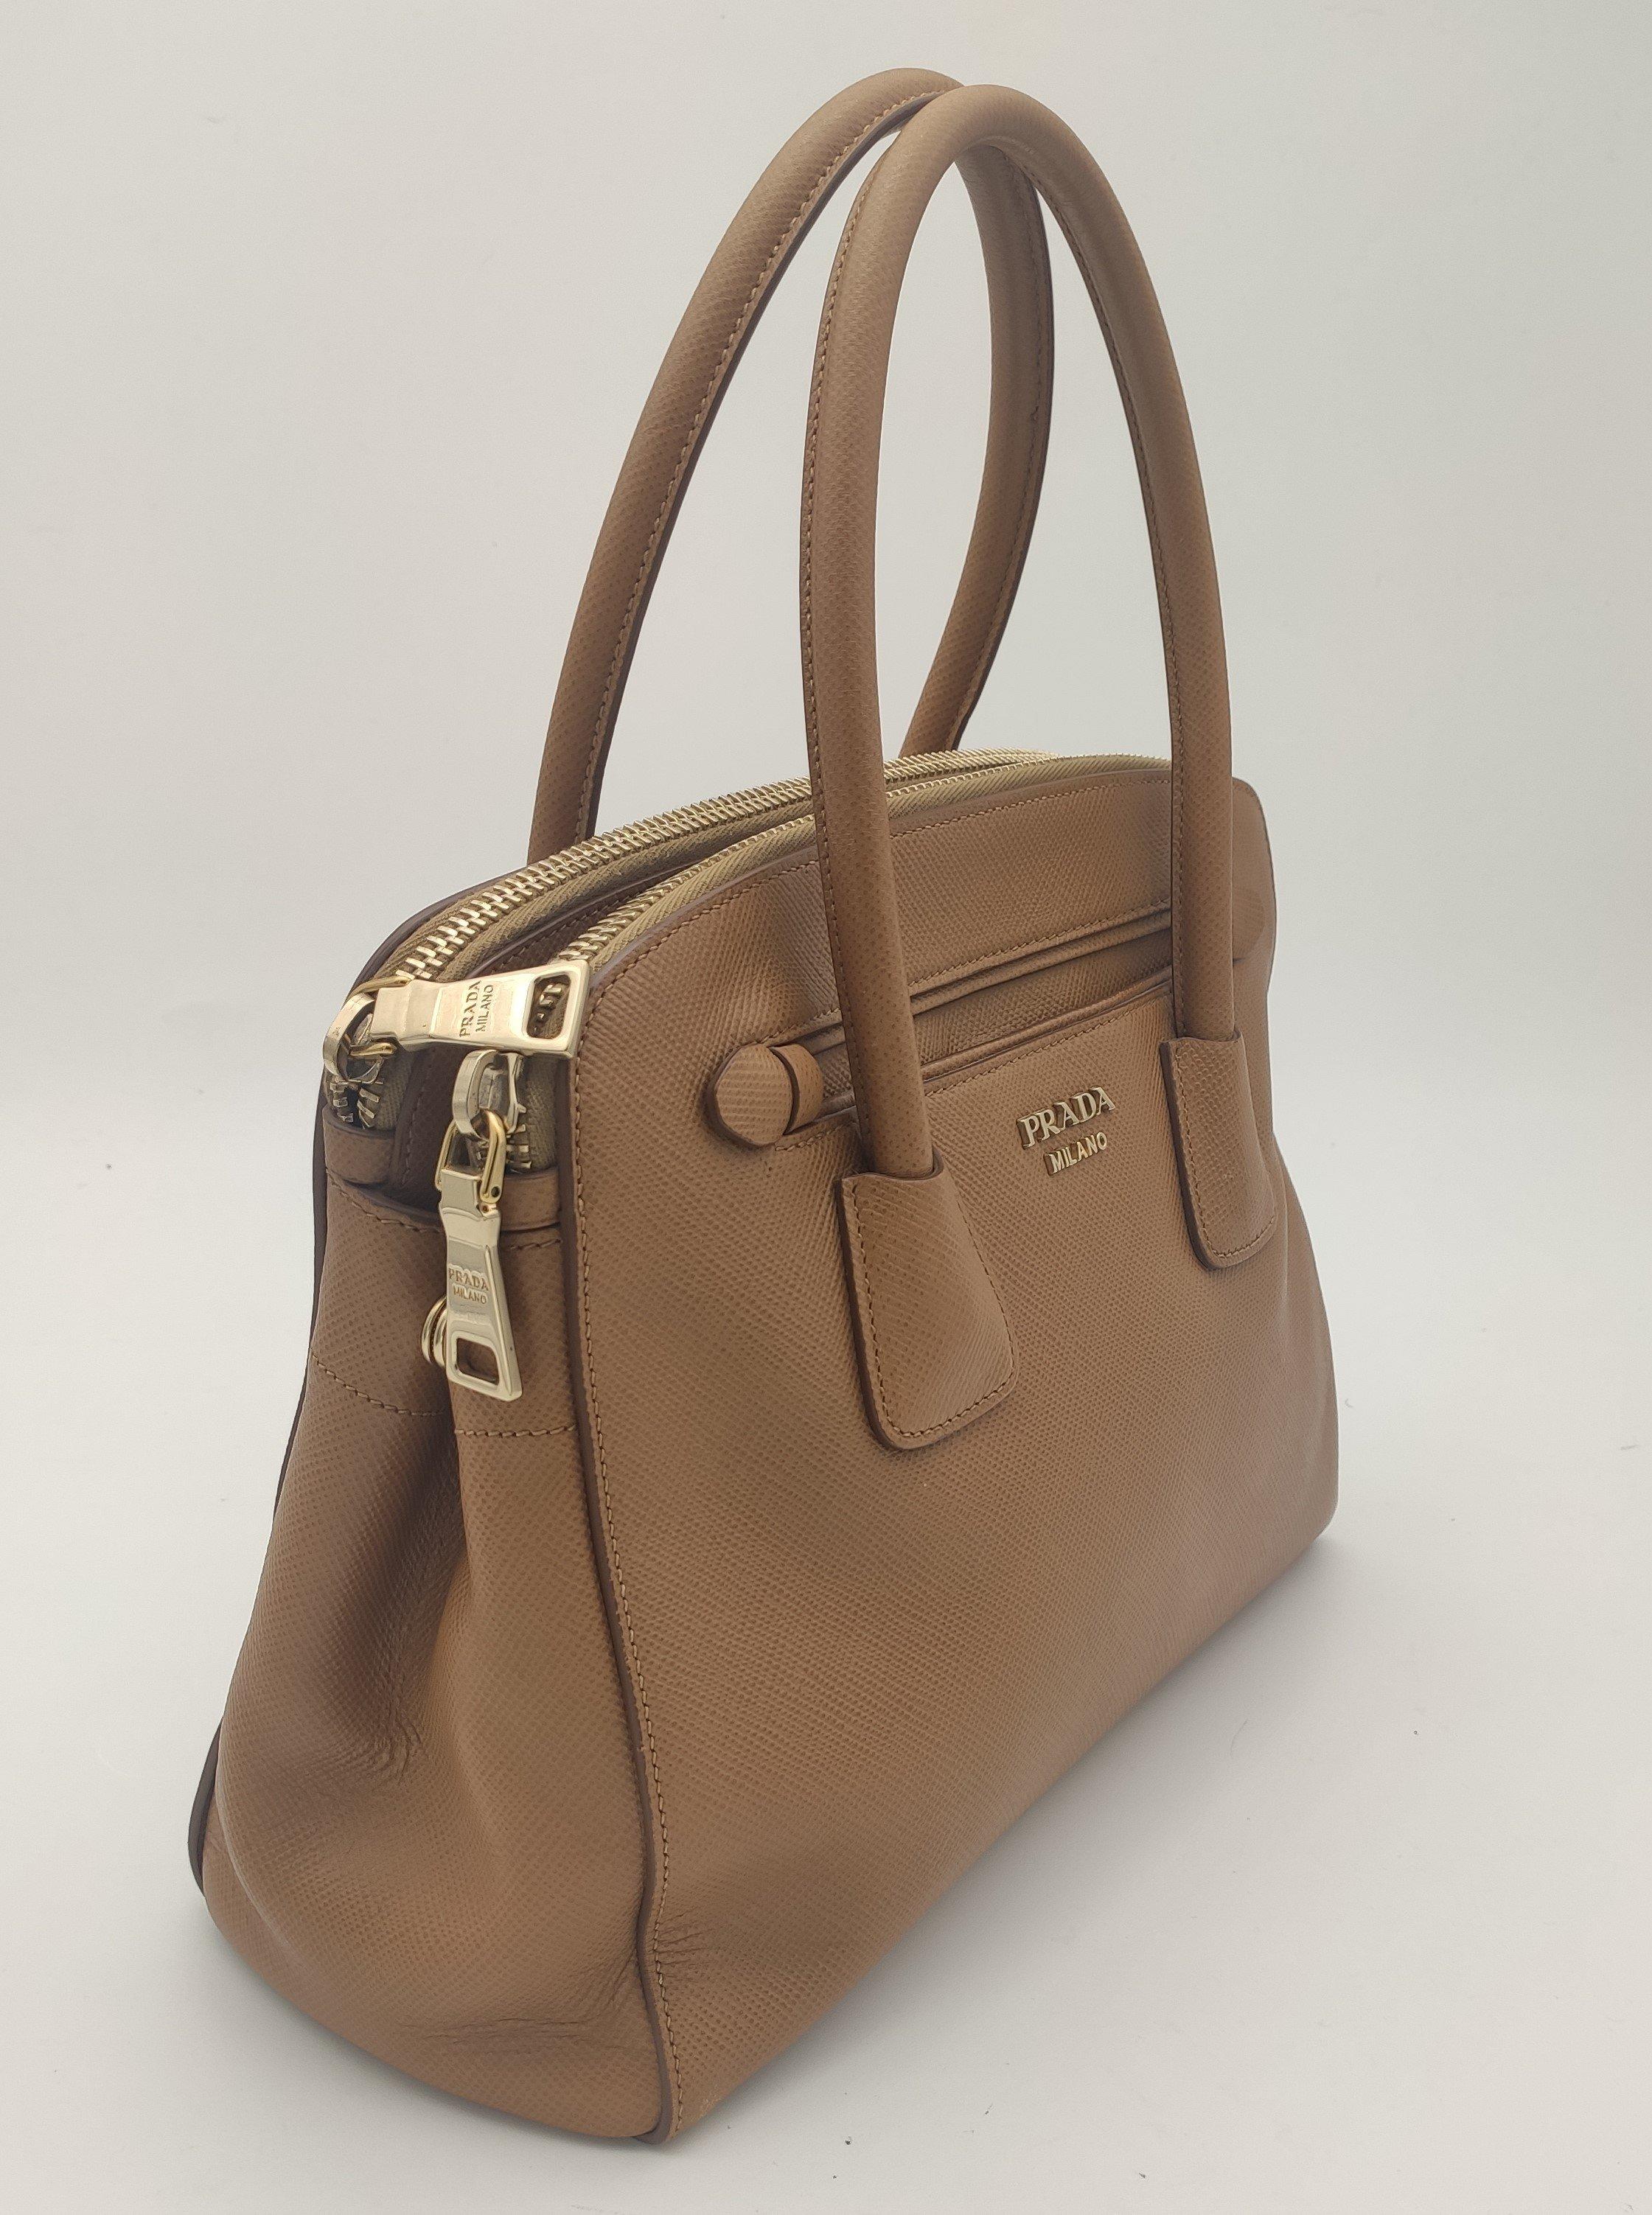 - Designer: PRADA
- Condition: Very good condition. Sign of wear on base corners
- Accessories: Dustbag, Authenticity Card
- Measurements: Width: 31cm, Height: 24cm, Depth: 14cm, Strap: 118cm
- Exterior Material: Leather
- Exterior Color: Brown
-